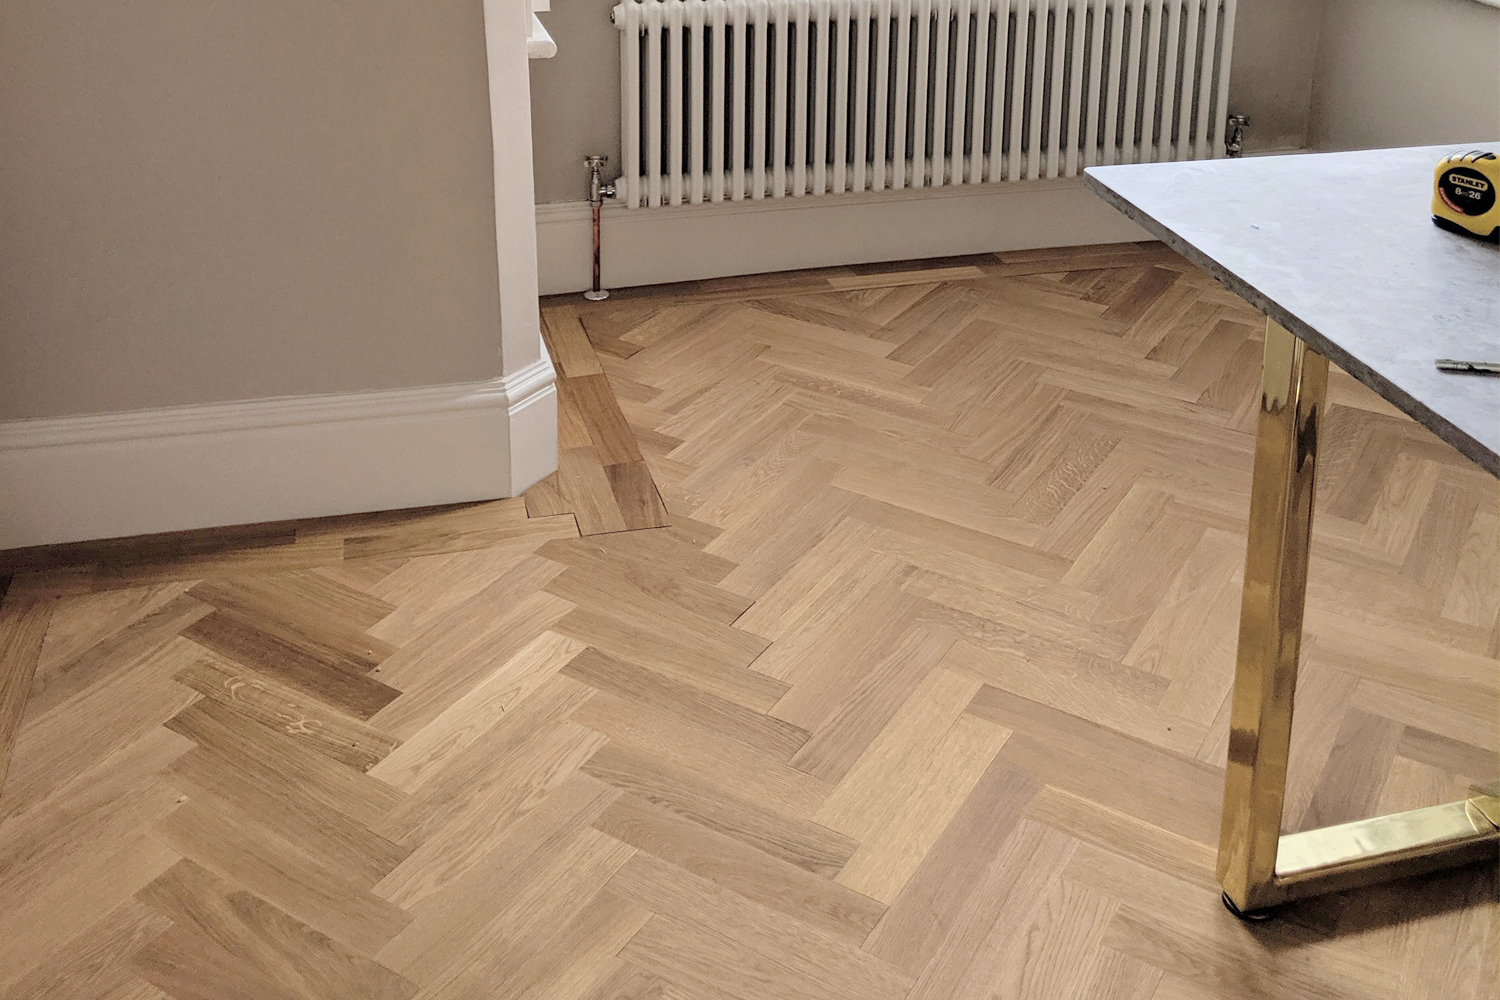 Laying Engineered Oak Parquet Flooring, Is Parquet Flooring Out Of Style